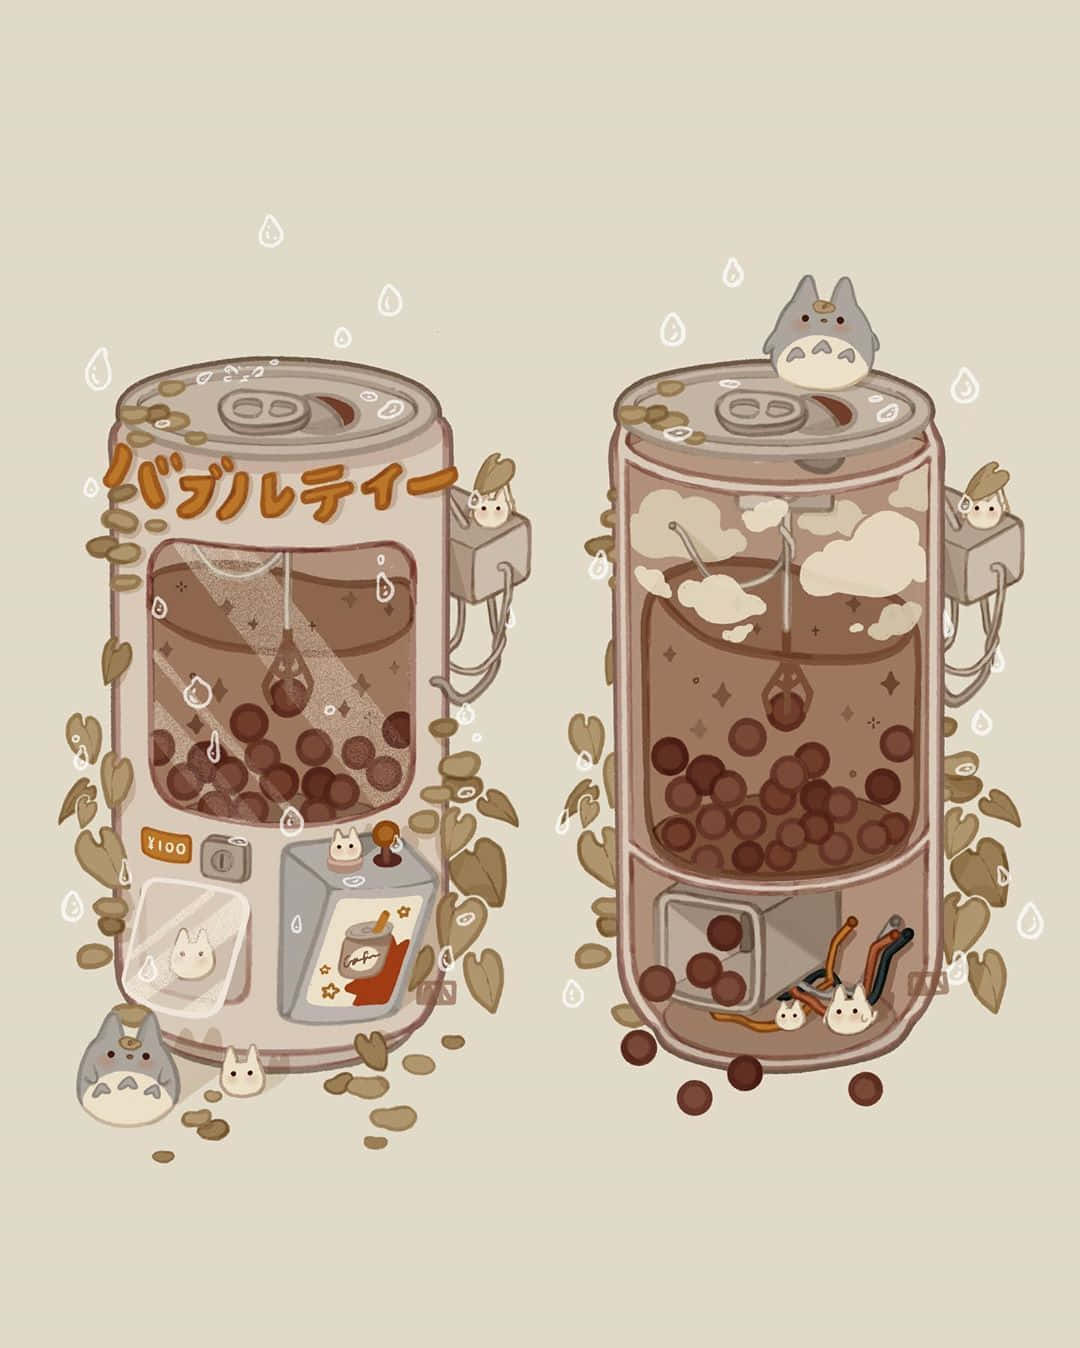 Two Coffee Machines With A Cat Inside Wallpaper